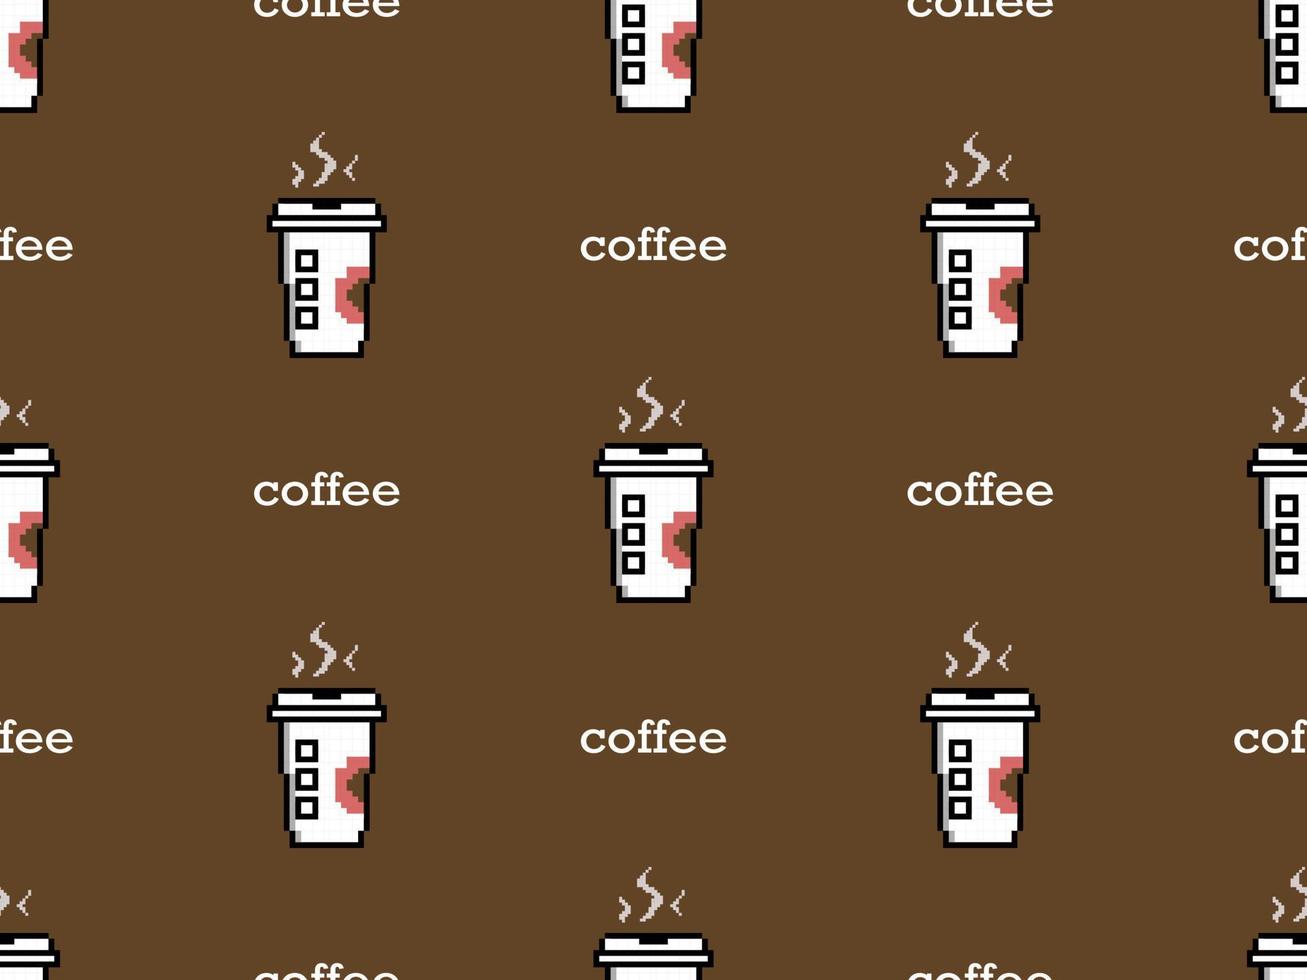 Coffee cartoon character seamless pattern on brown background.Pixel style vector